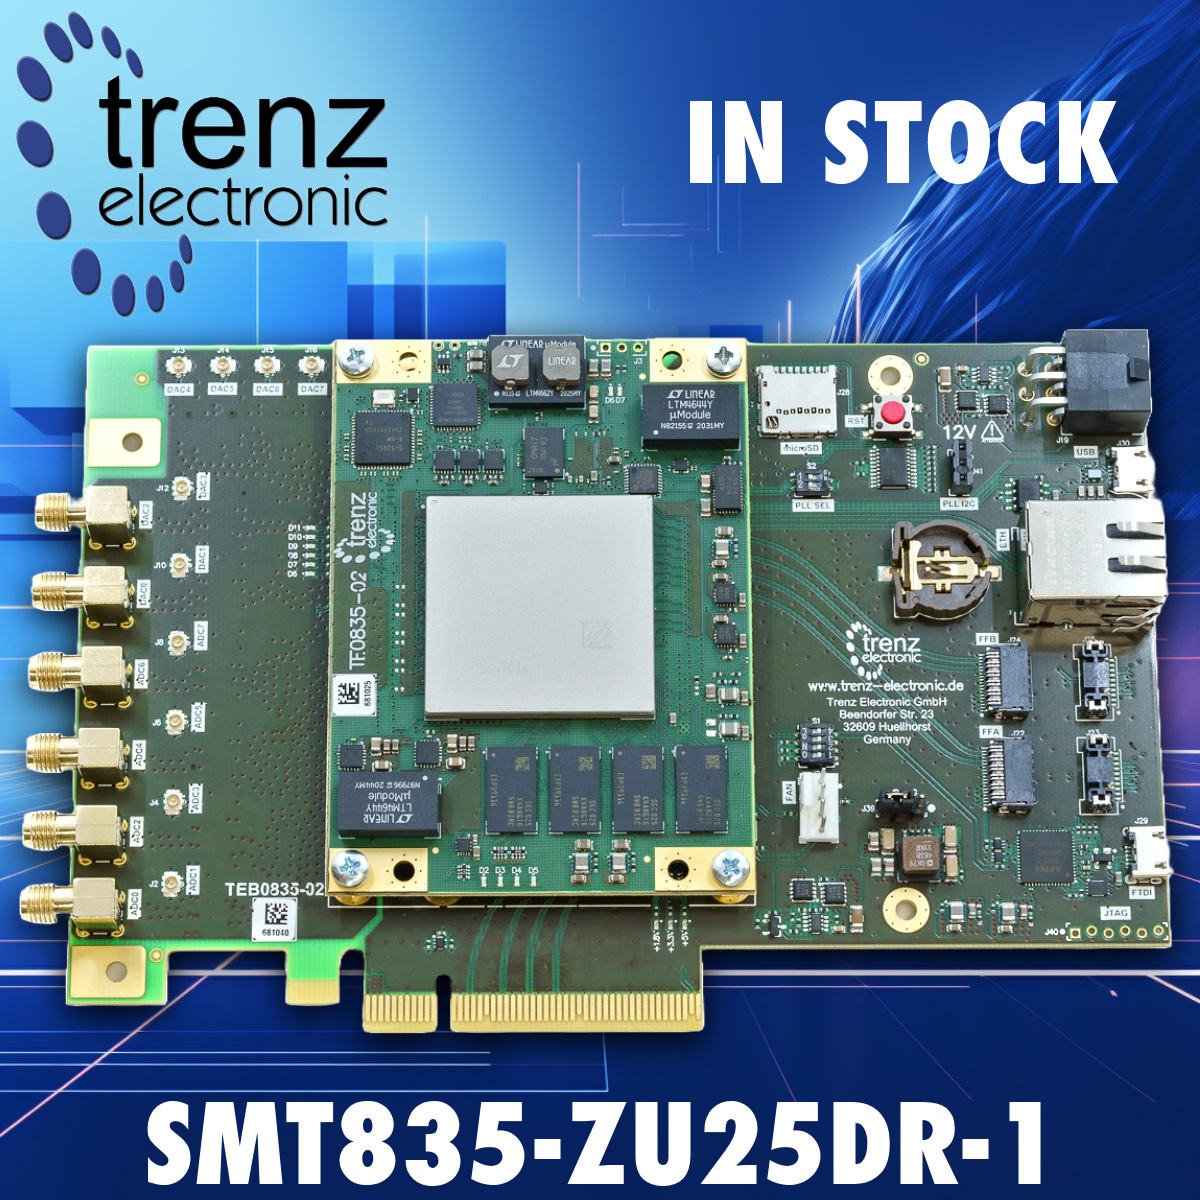 A PCIe ZynqRF system. We have three in stock.

sundance.com/smt835-zu25dr-…

#TrenzElectronic #FPGA #FPGAs #Embedded #FPGAdesign #Vivado #Vitis #Xilinx #MPSoC #AMDZynq #AMDXilinx #Zynq #EmbeddedSystems #EmbeddedSolutions #embeddedcomputing #TrenzElectronic #PCIe #UltraScalePlus